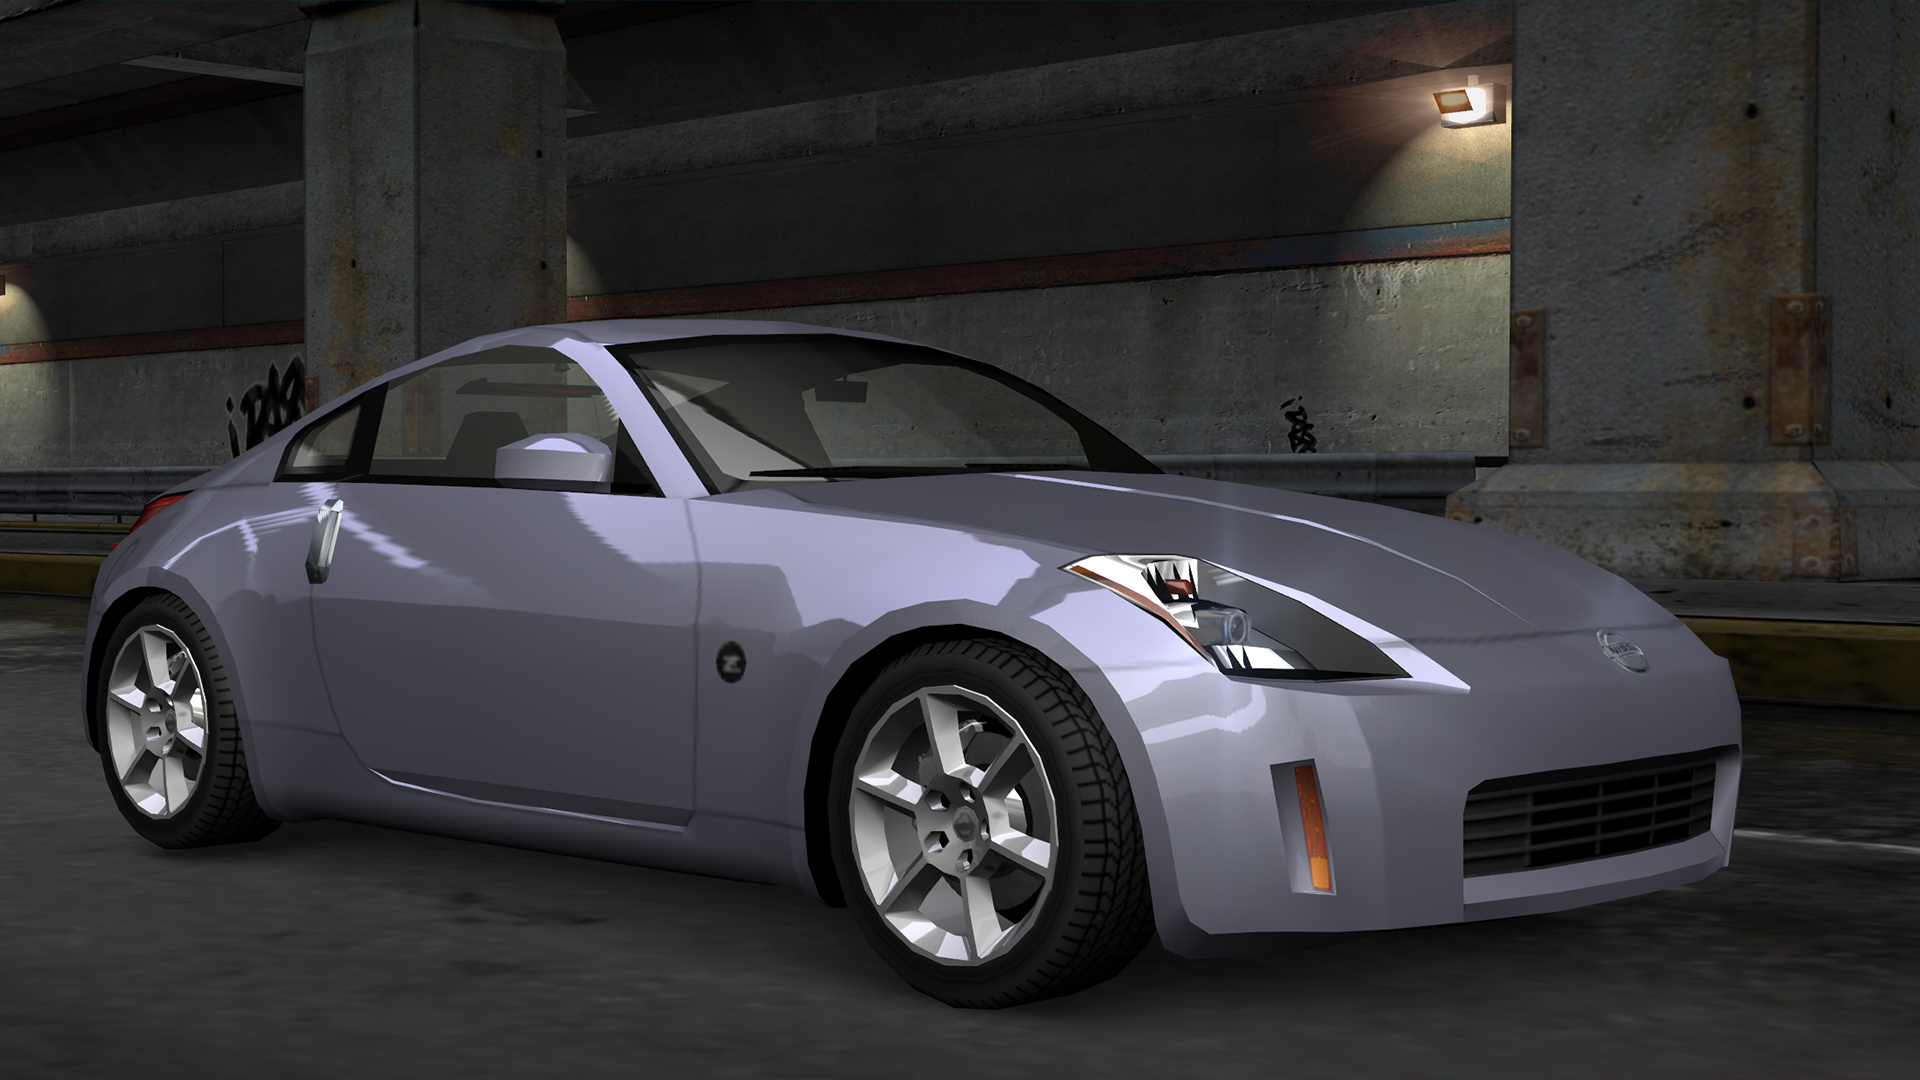 Nissan 350Z (2003), Need for Speed Wiki